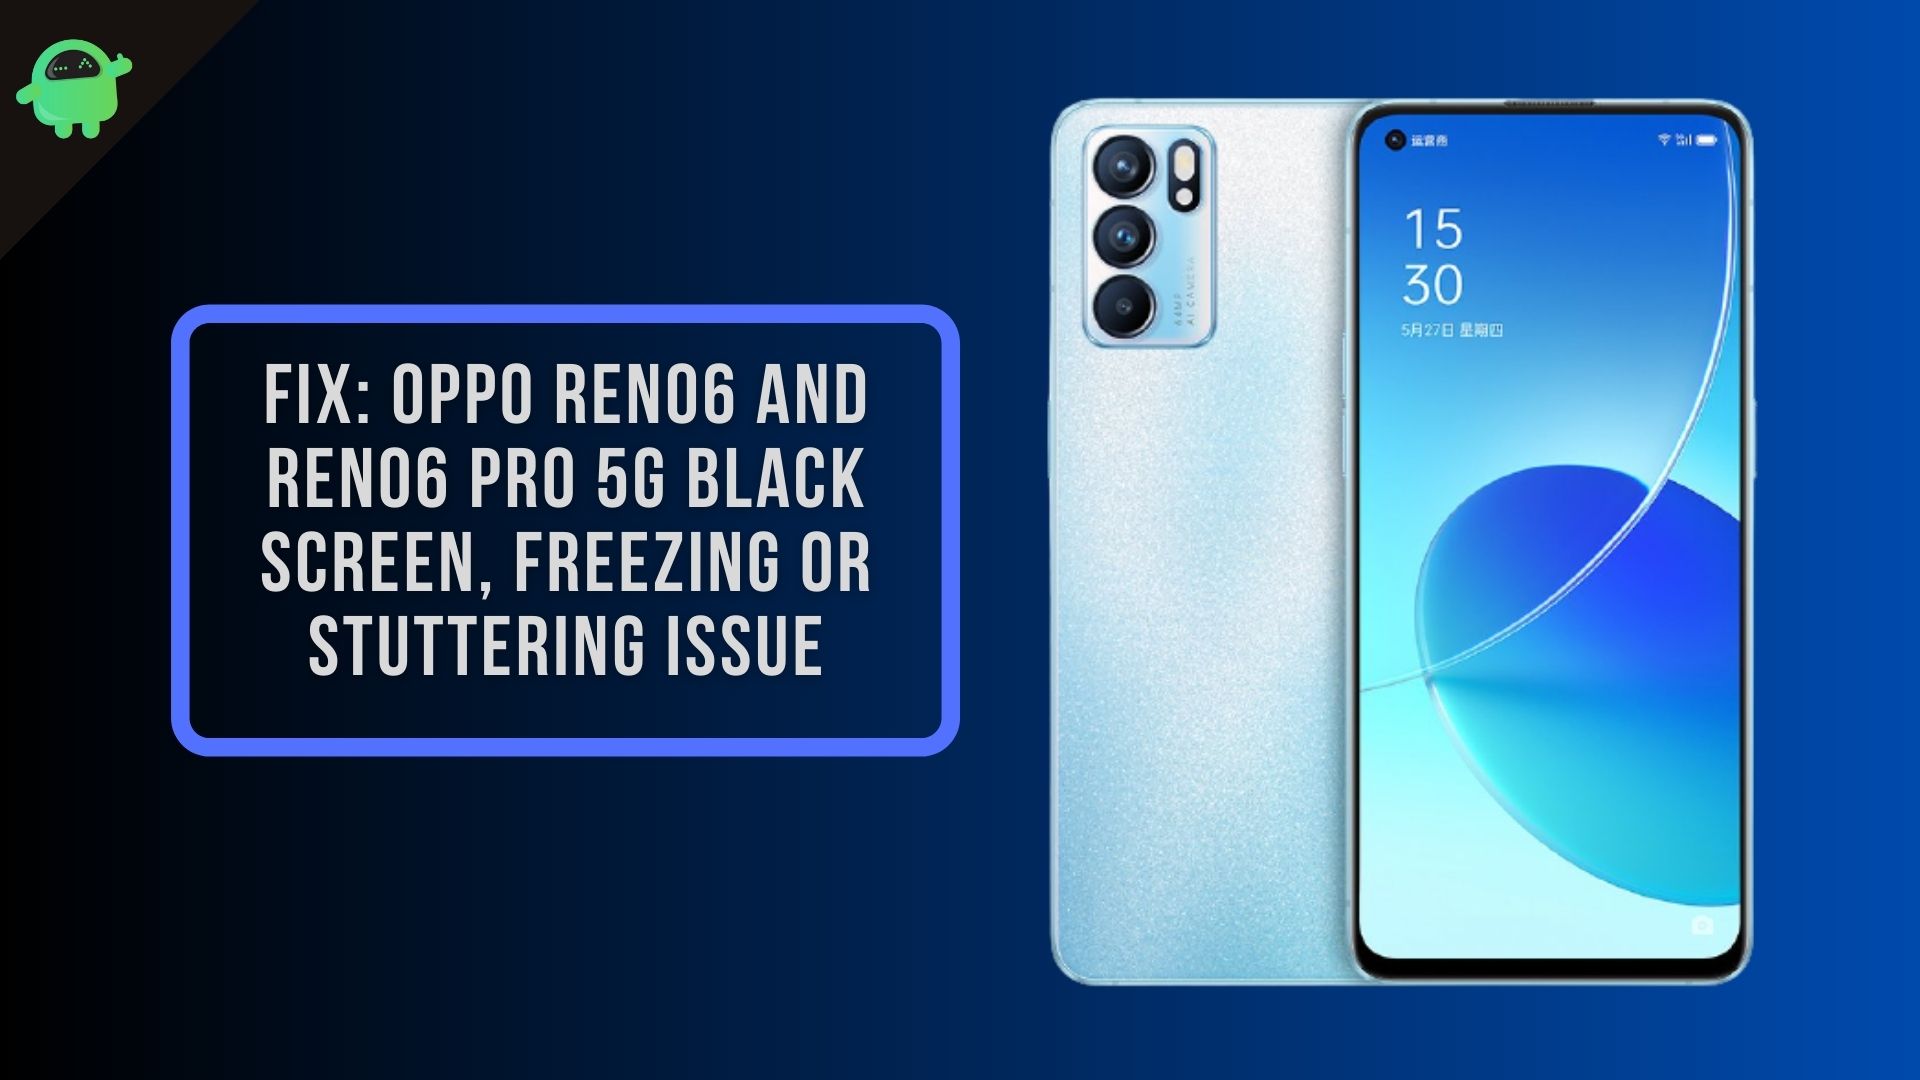 Fix: Oppo Reno6 and Reno6 Pro 5G Black Screen, Freezing or Stuttering Issue